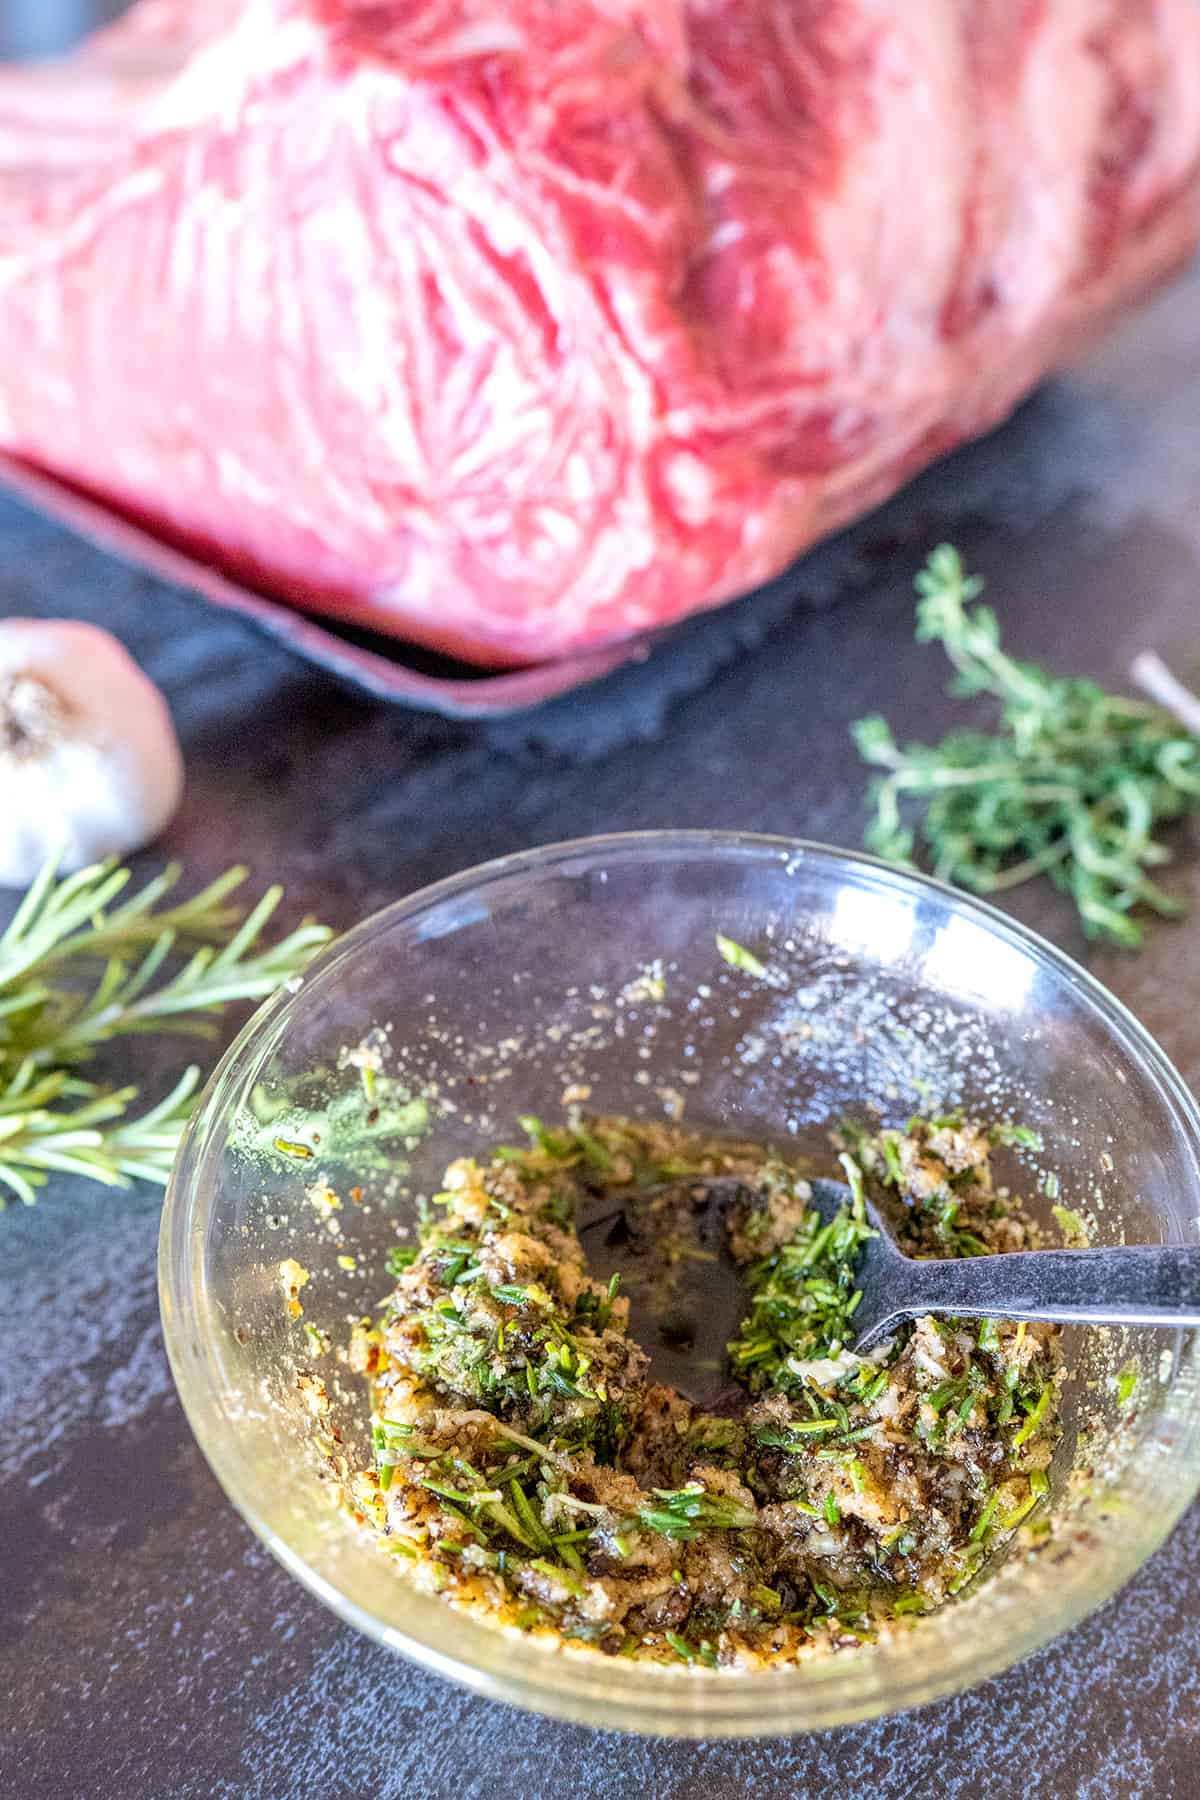 seasoning mixed with herbs, garlic and olive oil.